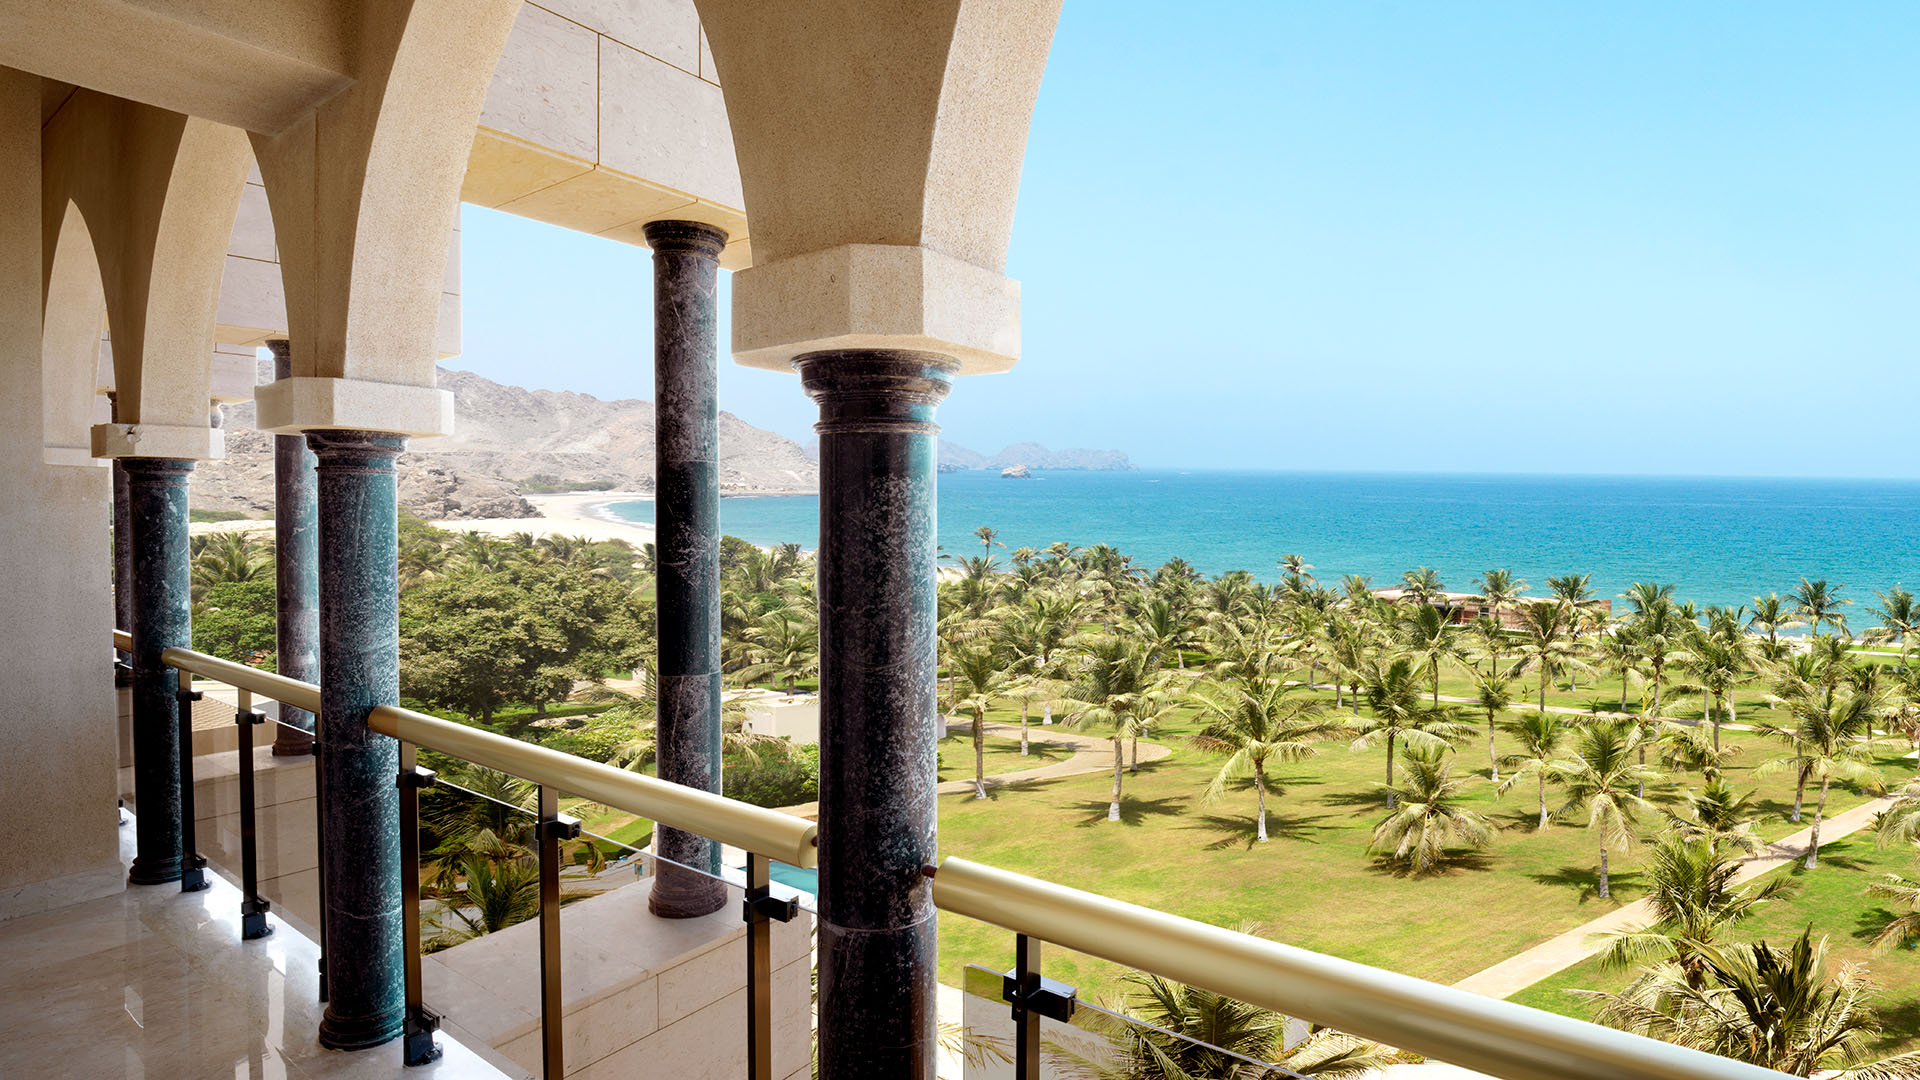 marble patio and view of palm trees and the Sea of Oman at Al Bustan Palace, a Ritz-Carlton Hotel